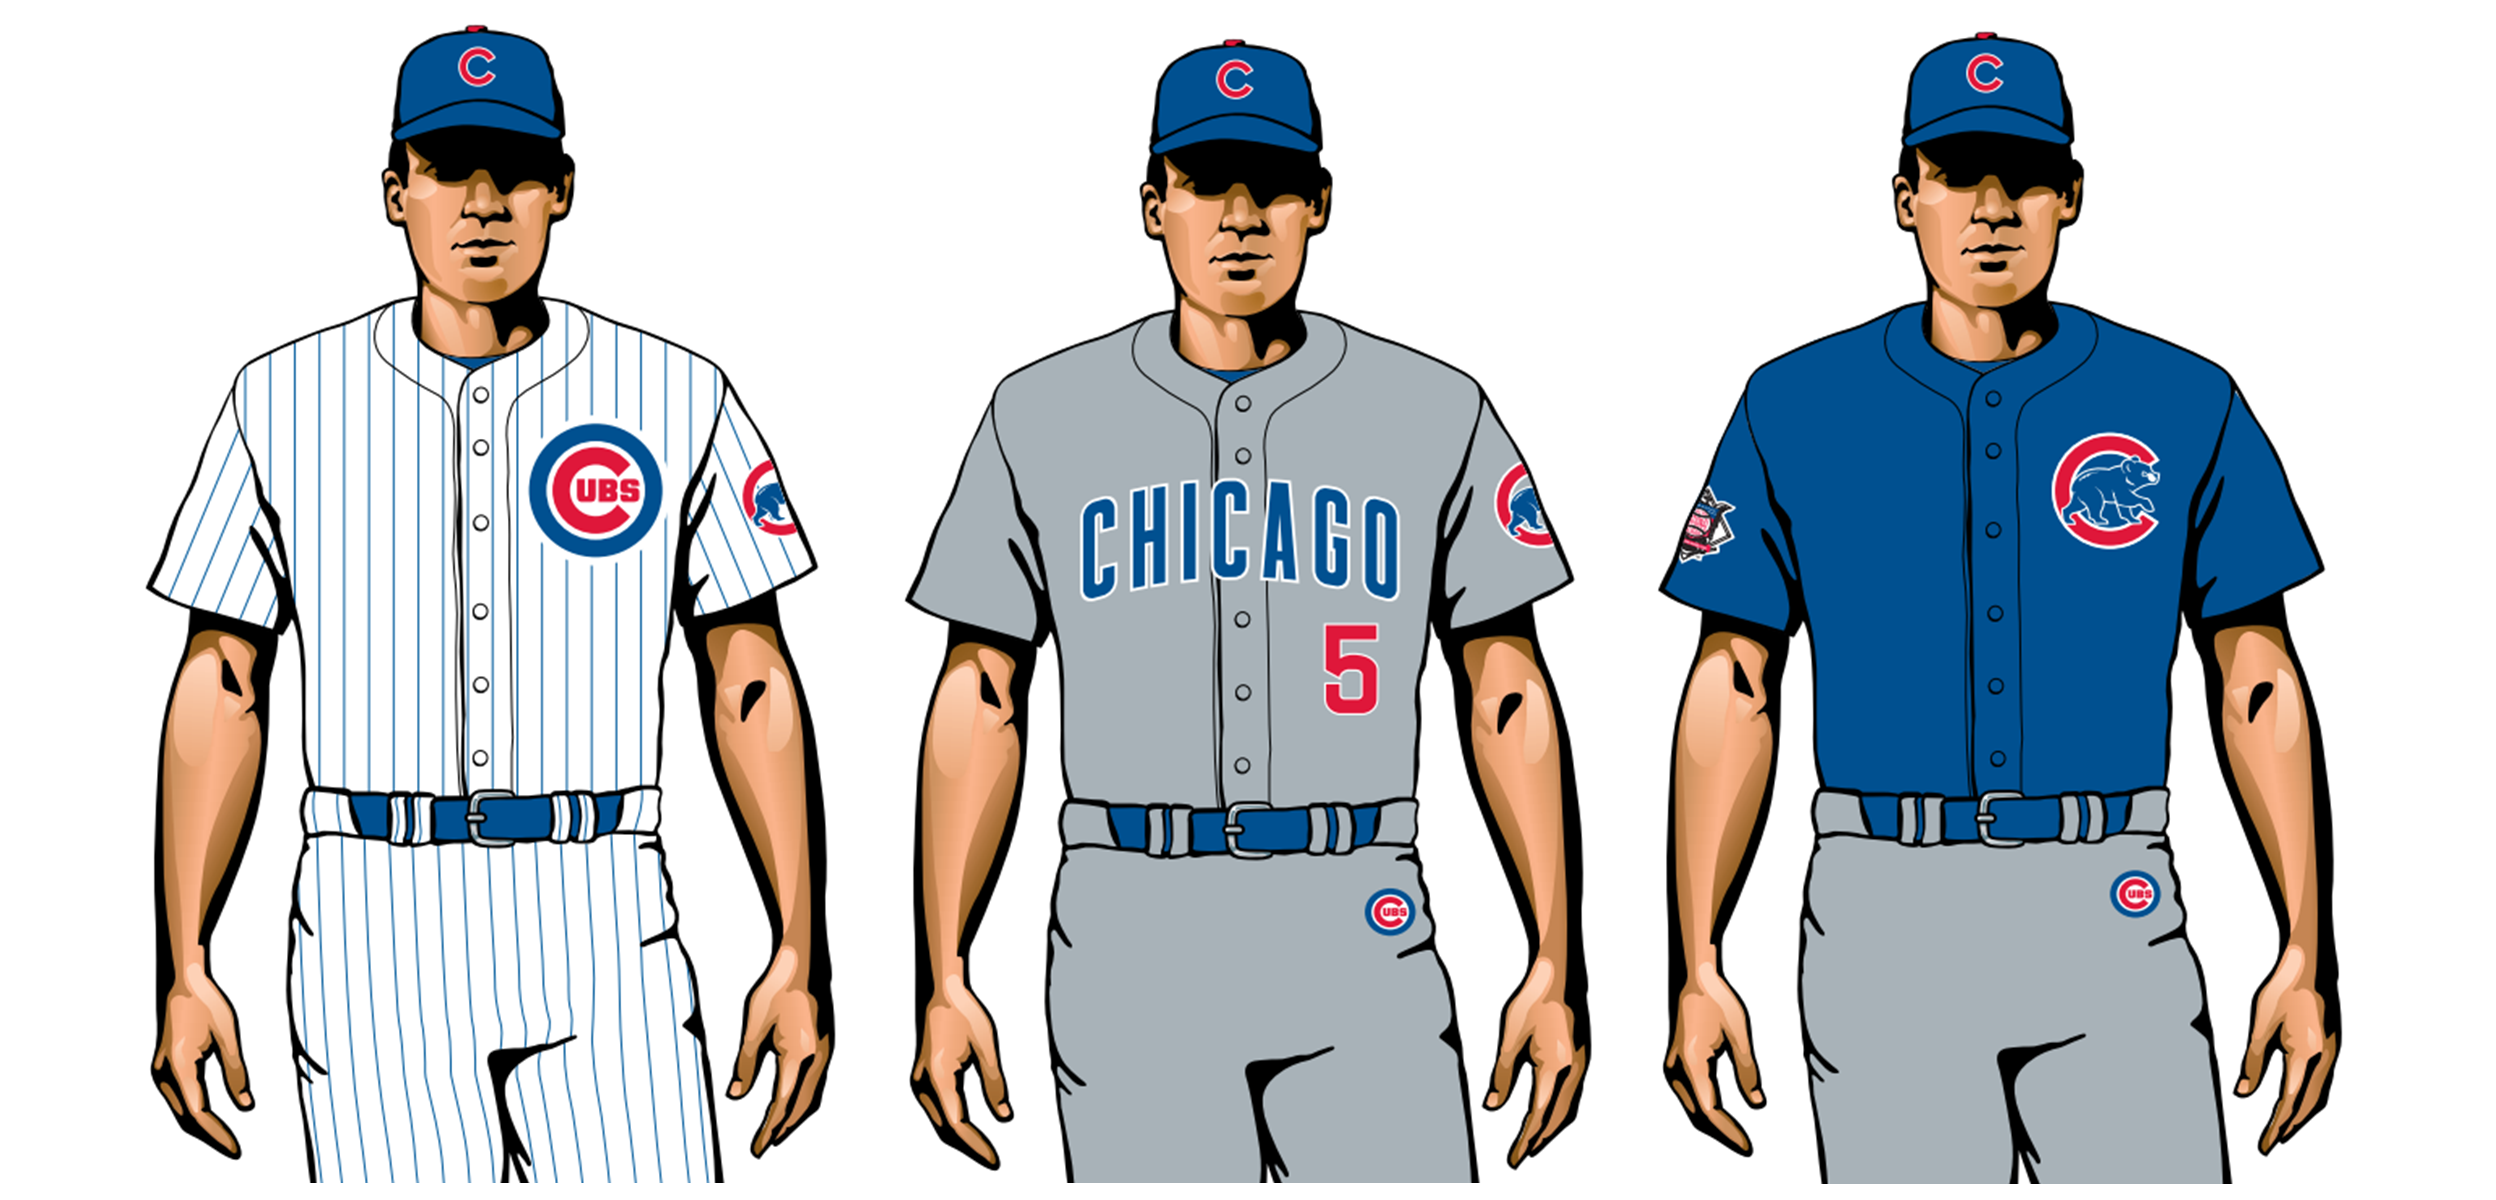 Ranking the 10 Worst Uniforms in MLB History